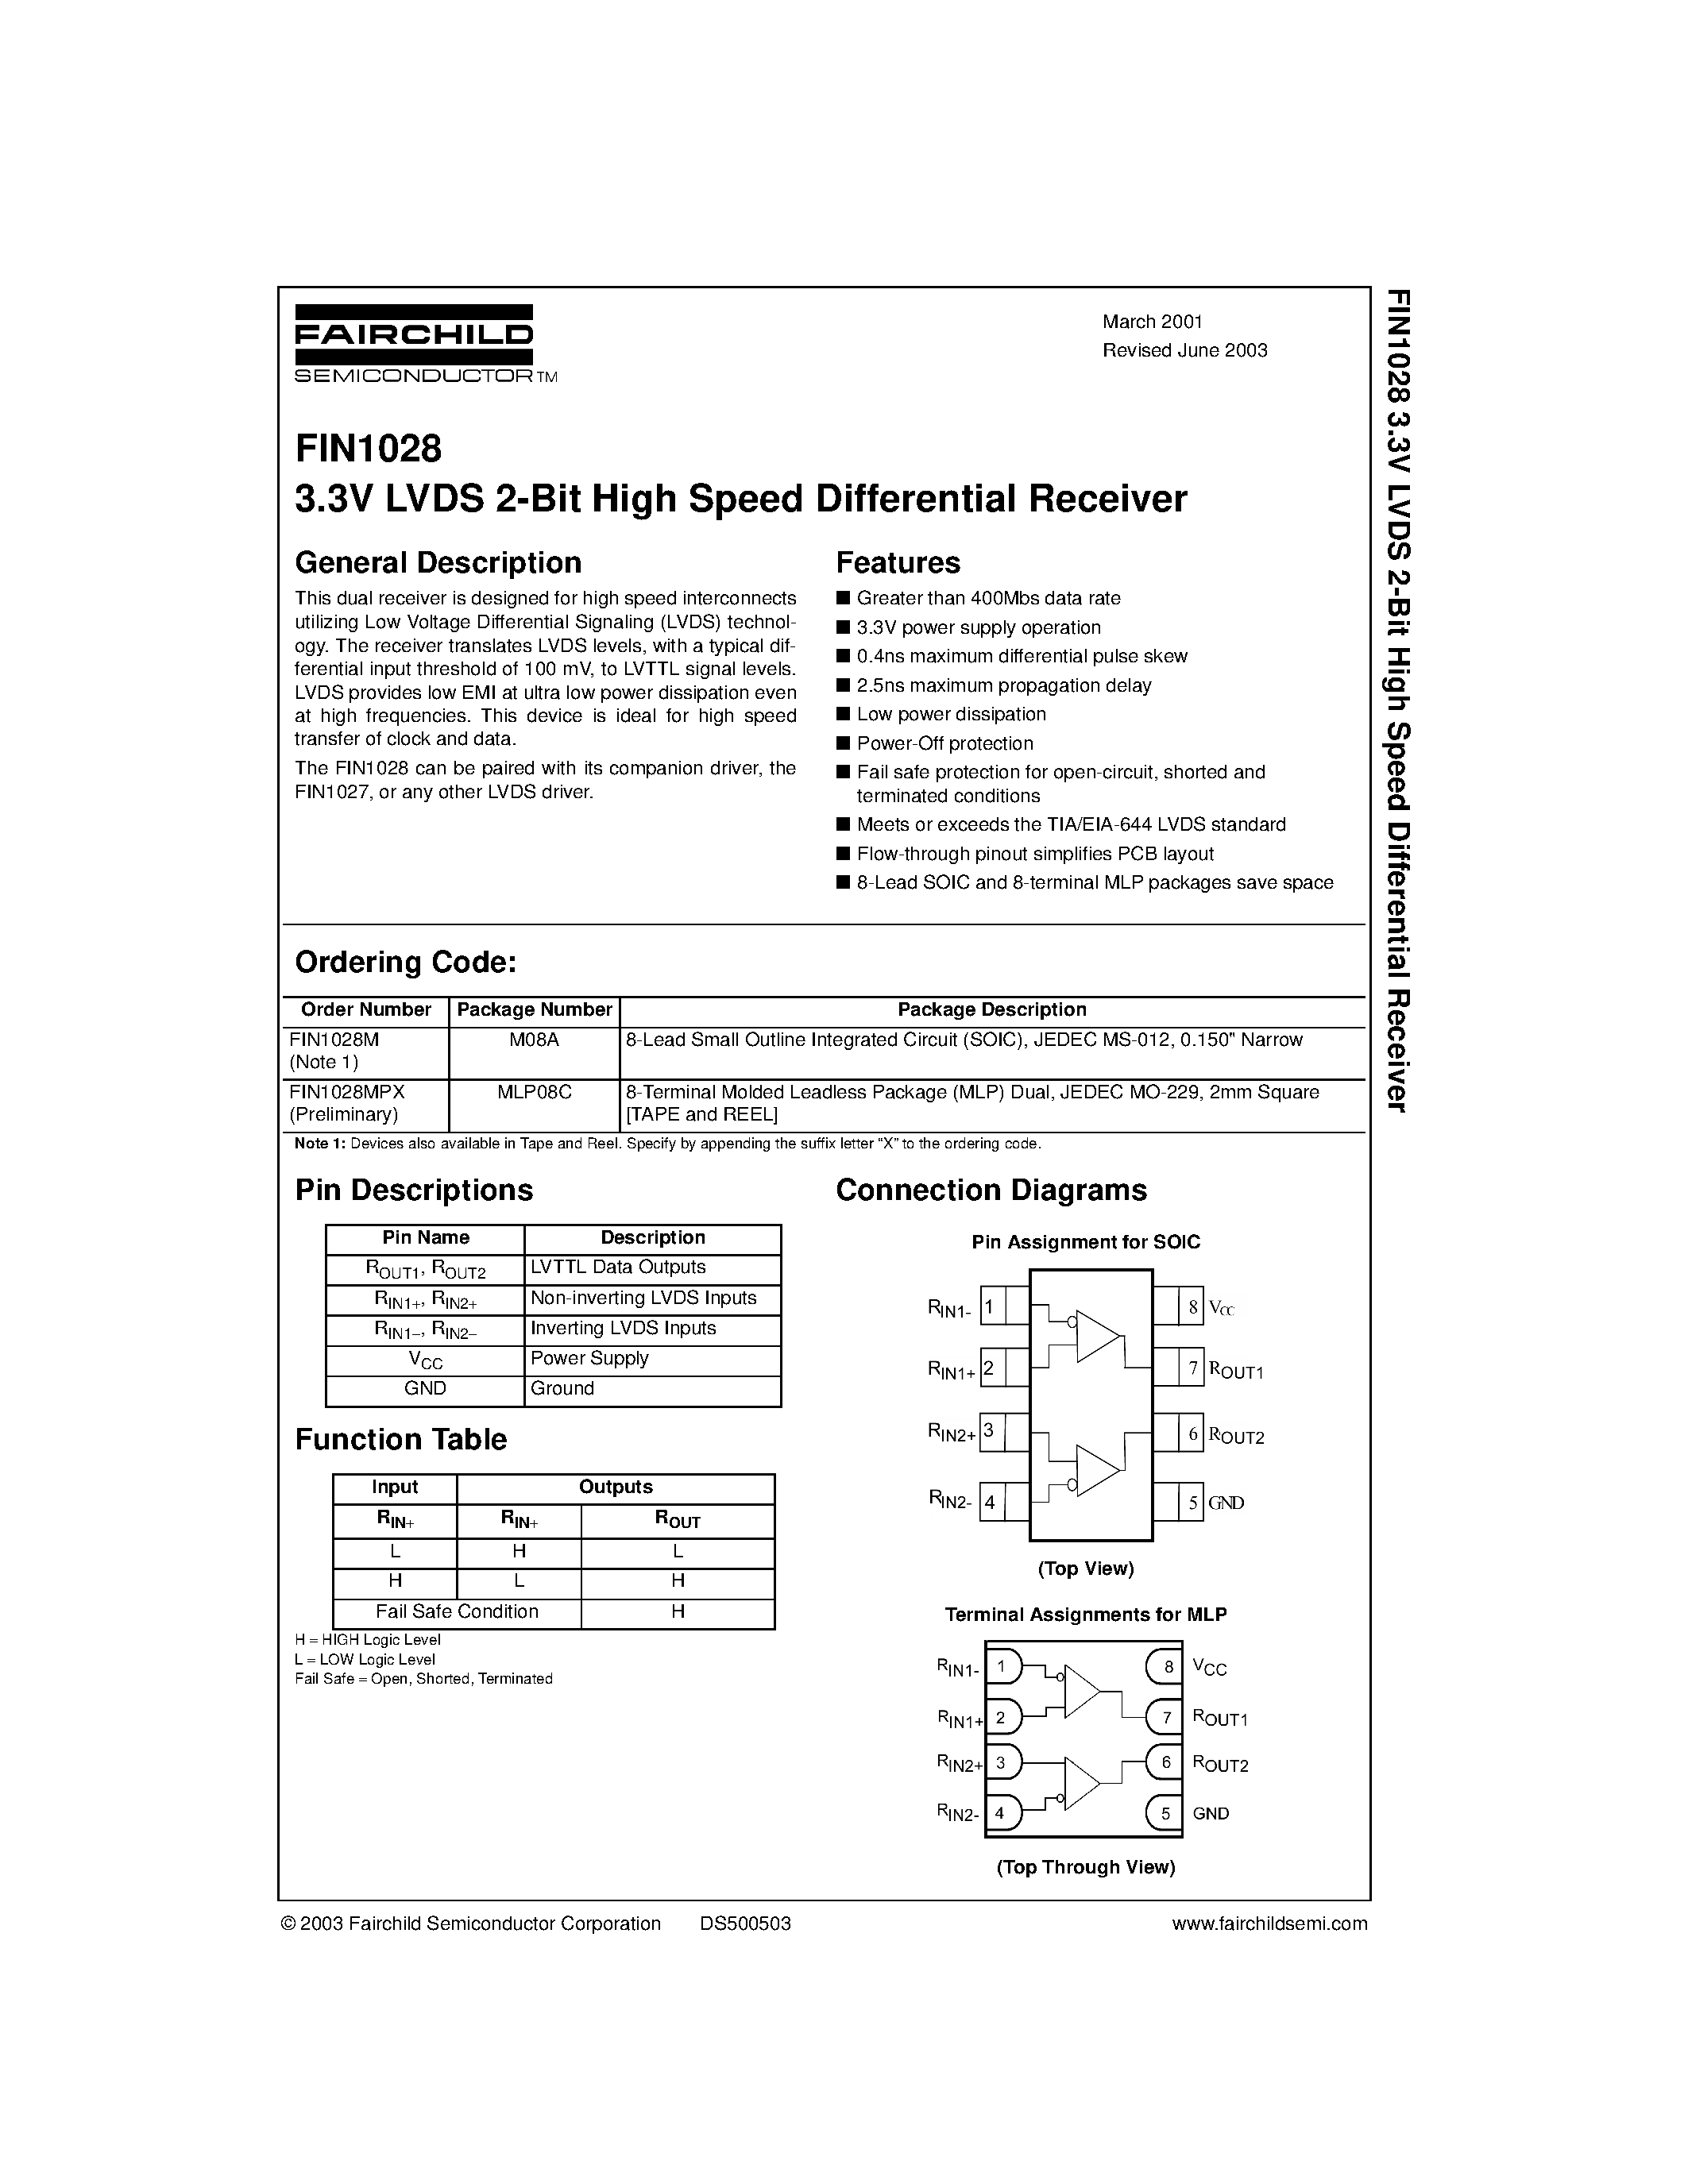 Datasheet FIN1028 - 3.3V LVDS 2-Bit High Speed Differential Receiver page 1